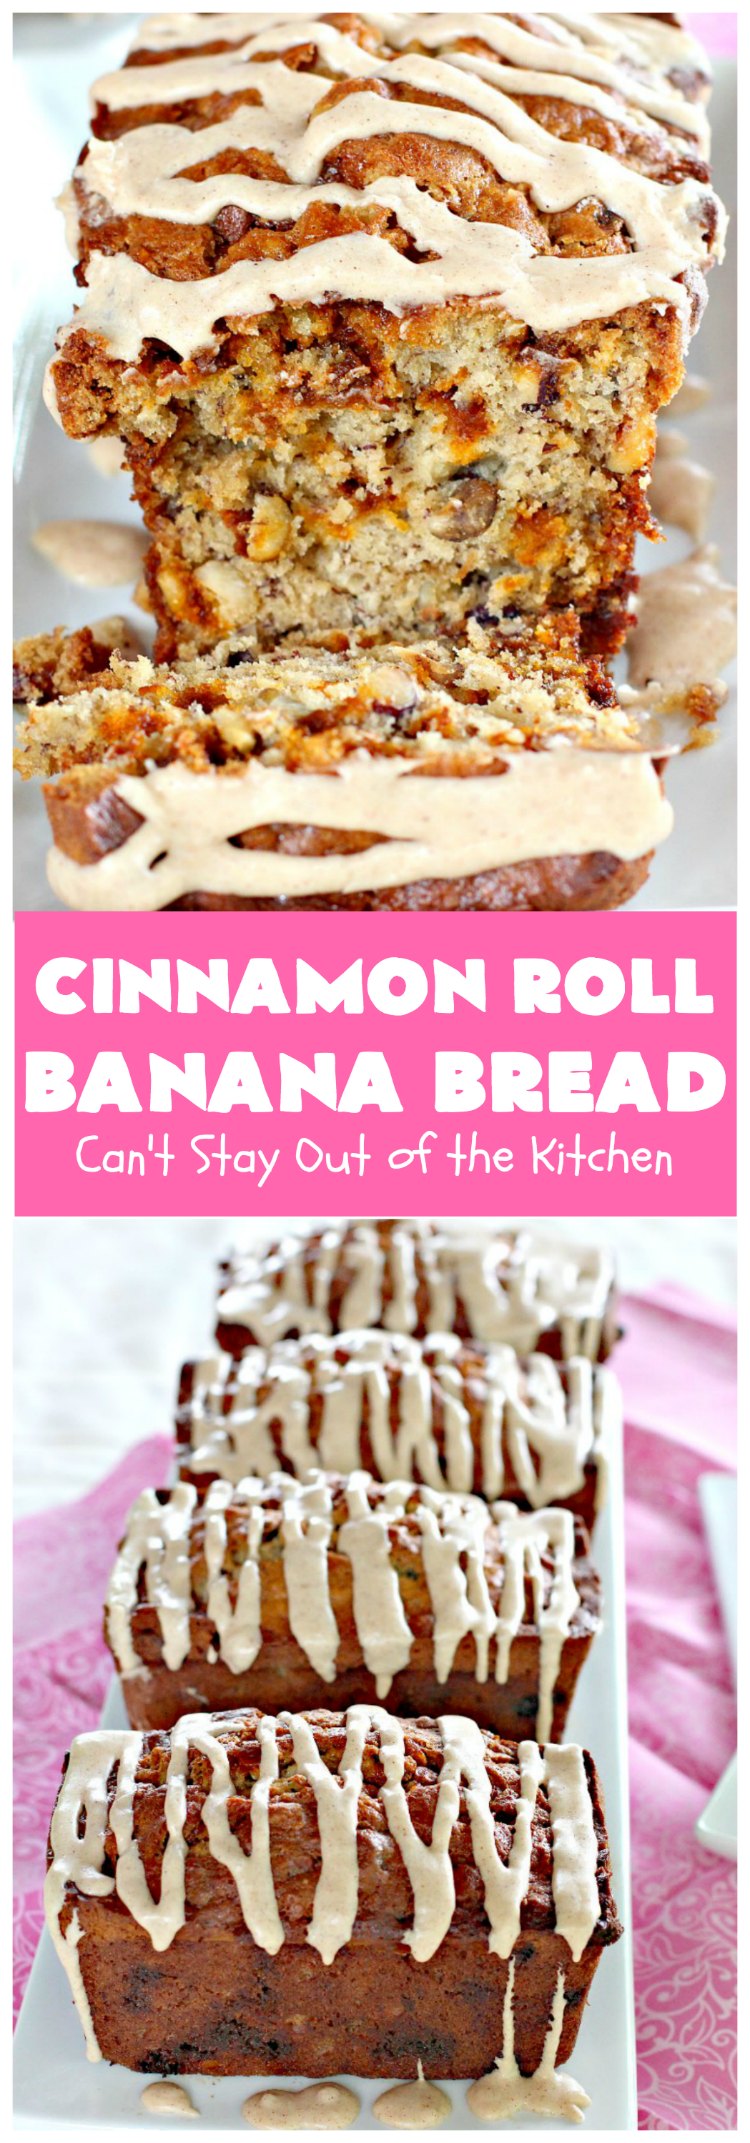 Cinnamon Roll Banana Bread | Can't Stay Out of the KitchenCinnamon Roll Banana Bread | Can't Stay Out of the Kitchen